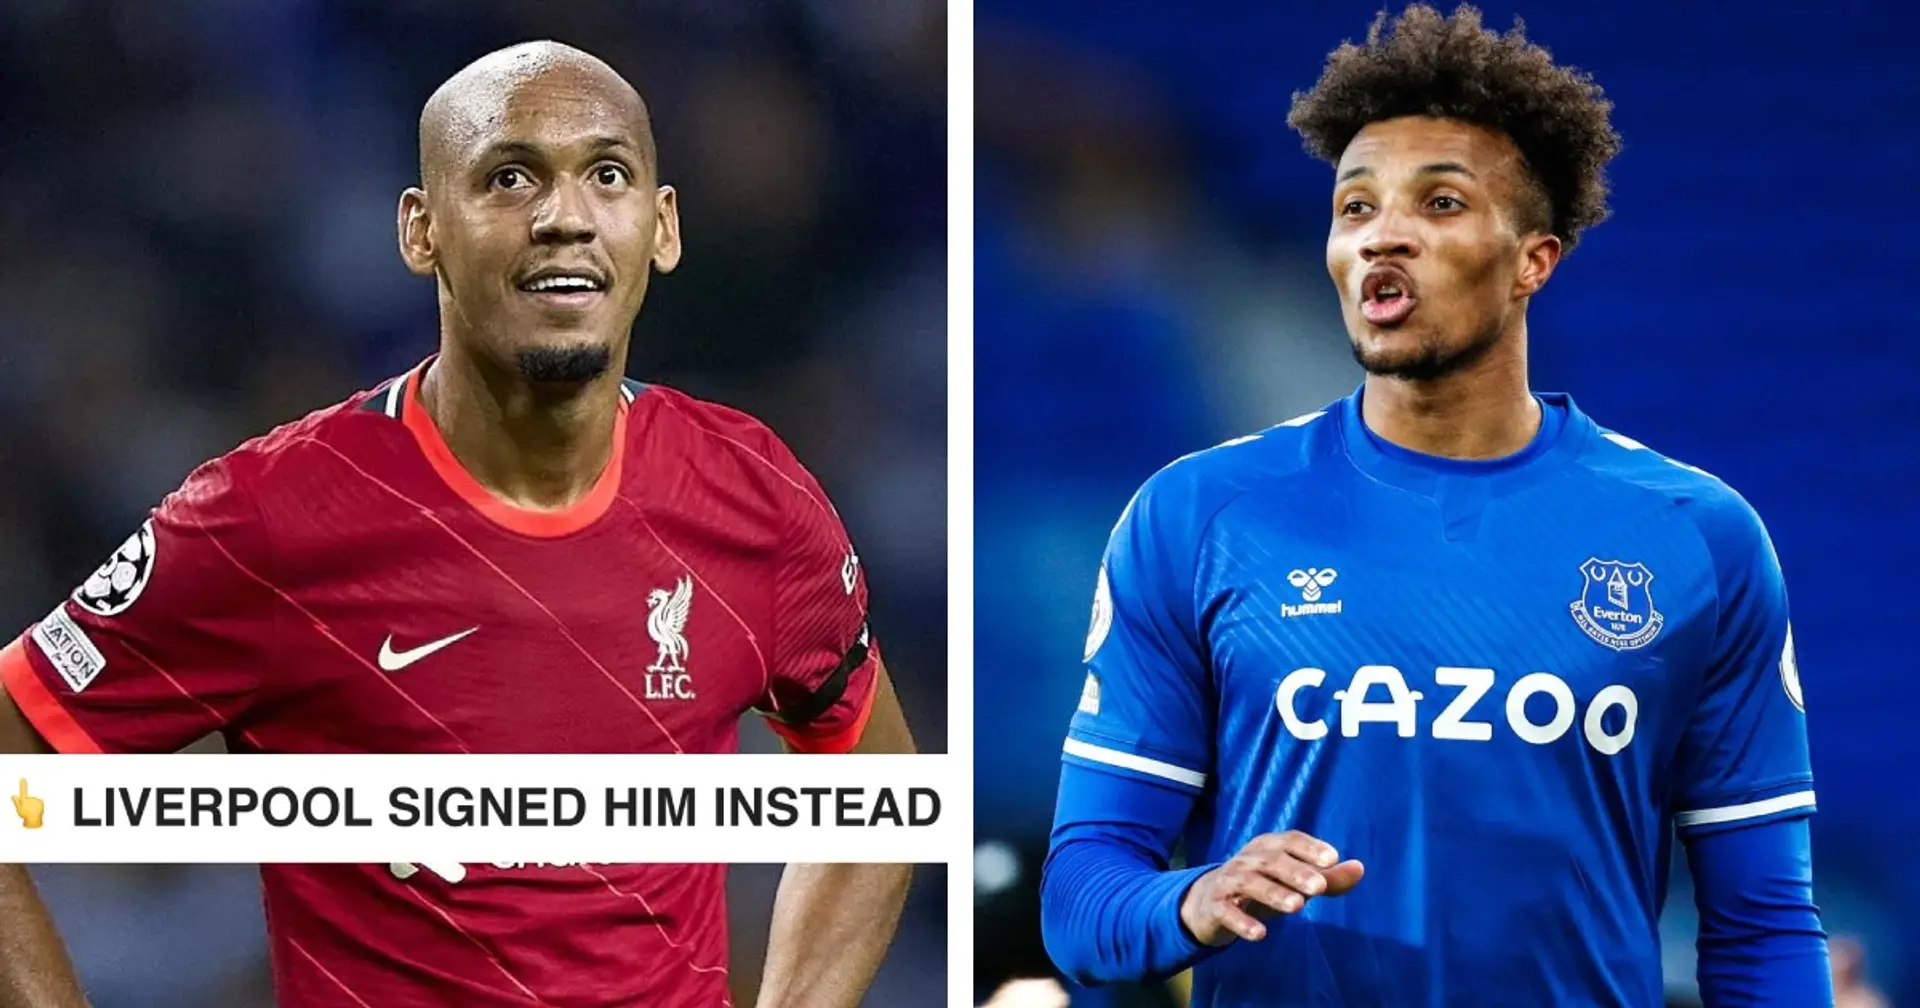 Agent reveals Klopp wanted to sign midfielder who ended up joining Everton – he doesn't have a club now